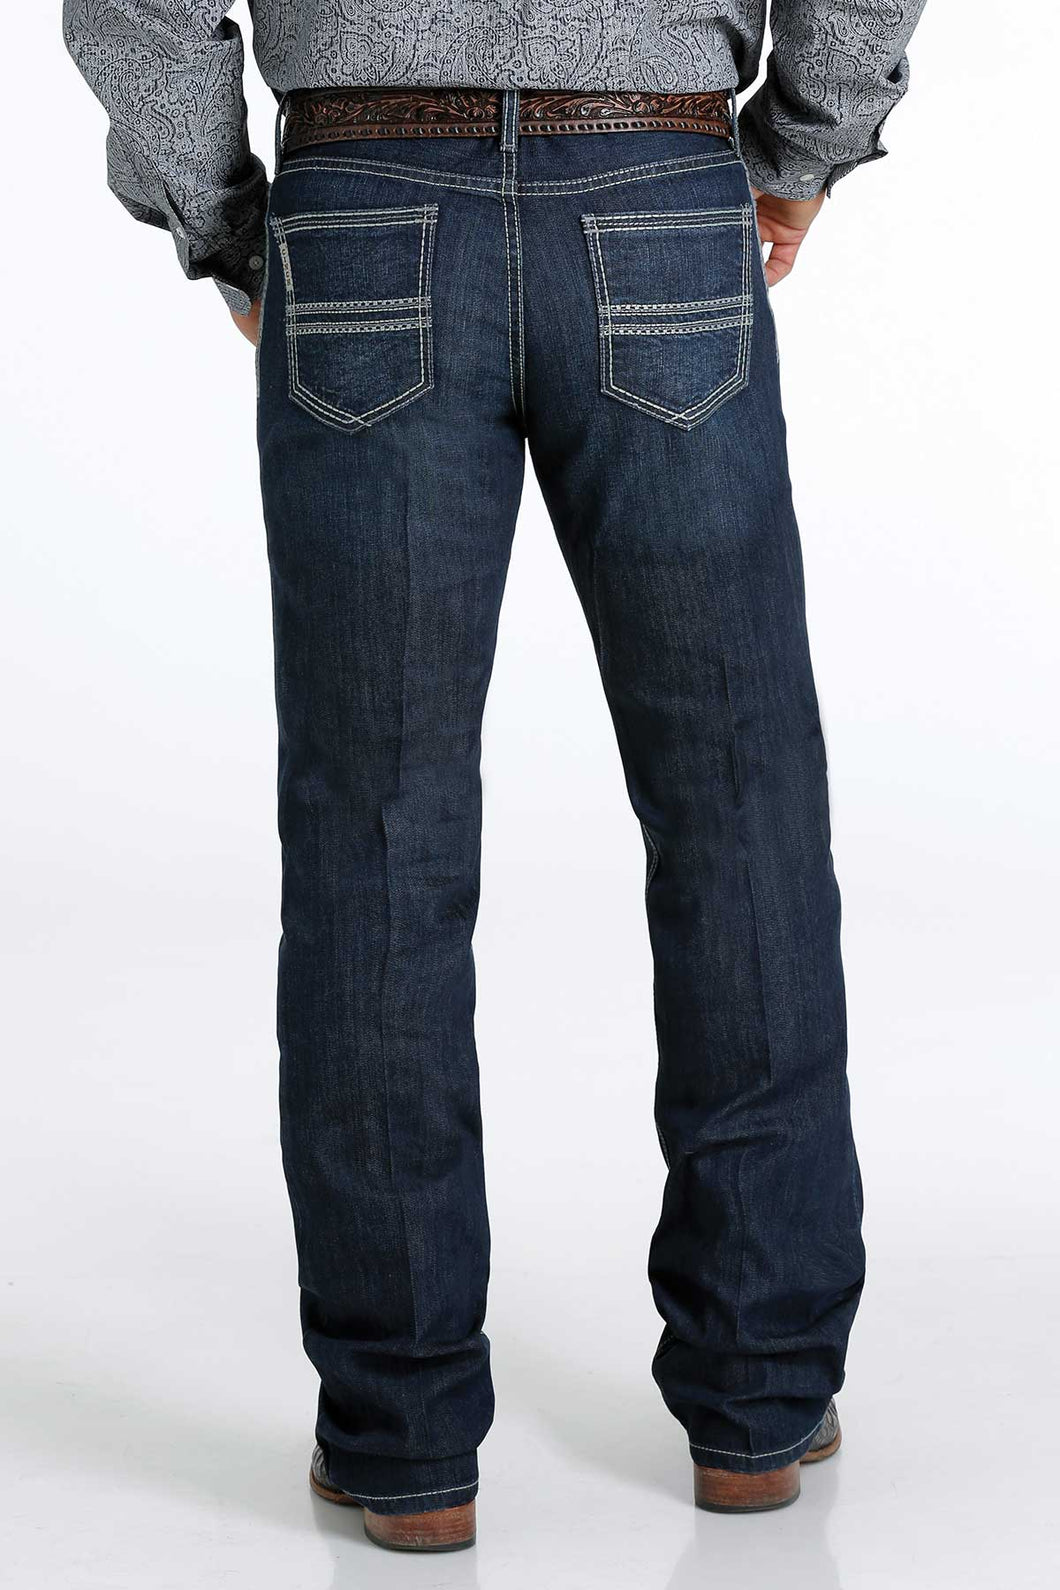 CINCH LIMITED EDITION IAN MENS JEANS